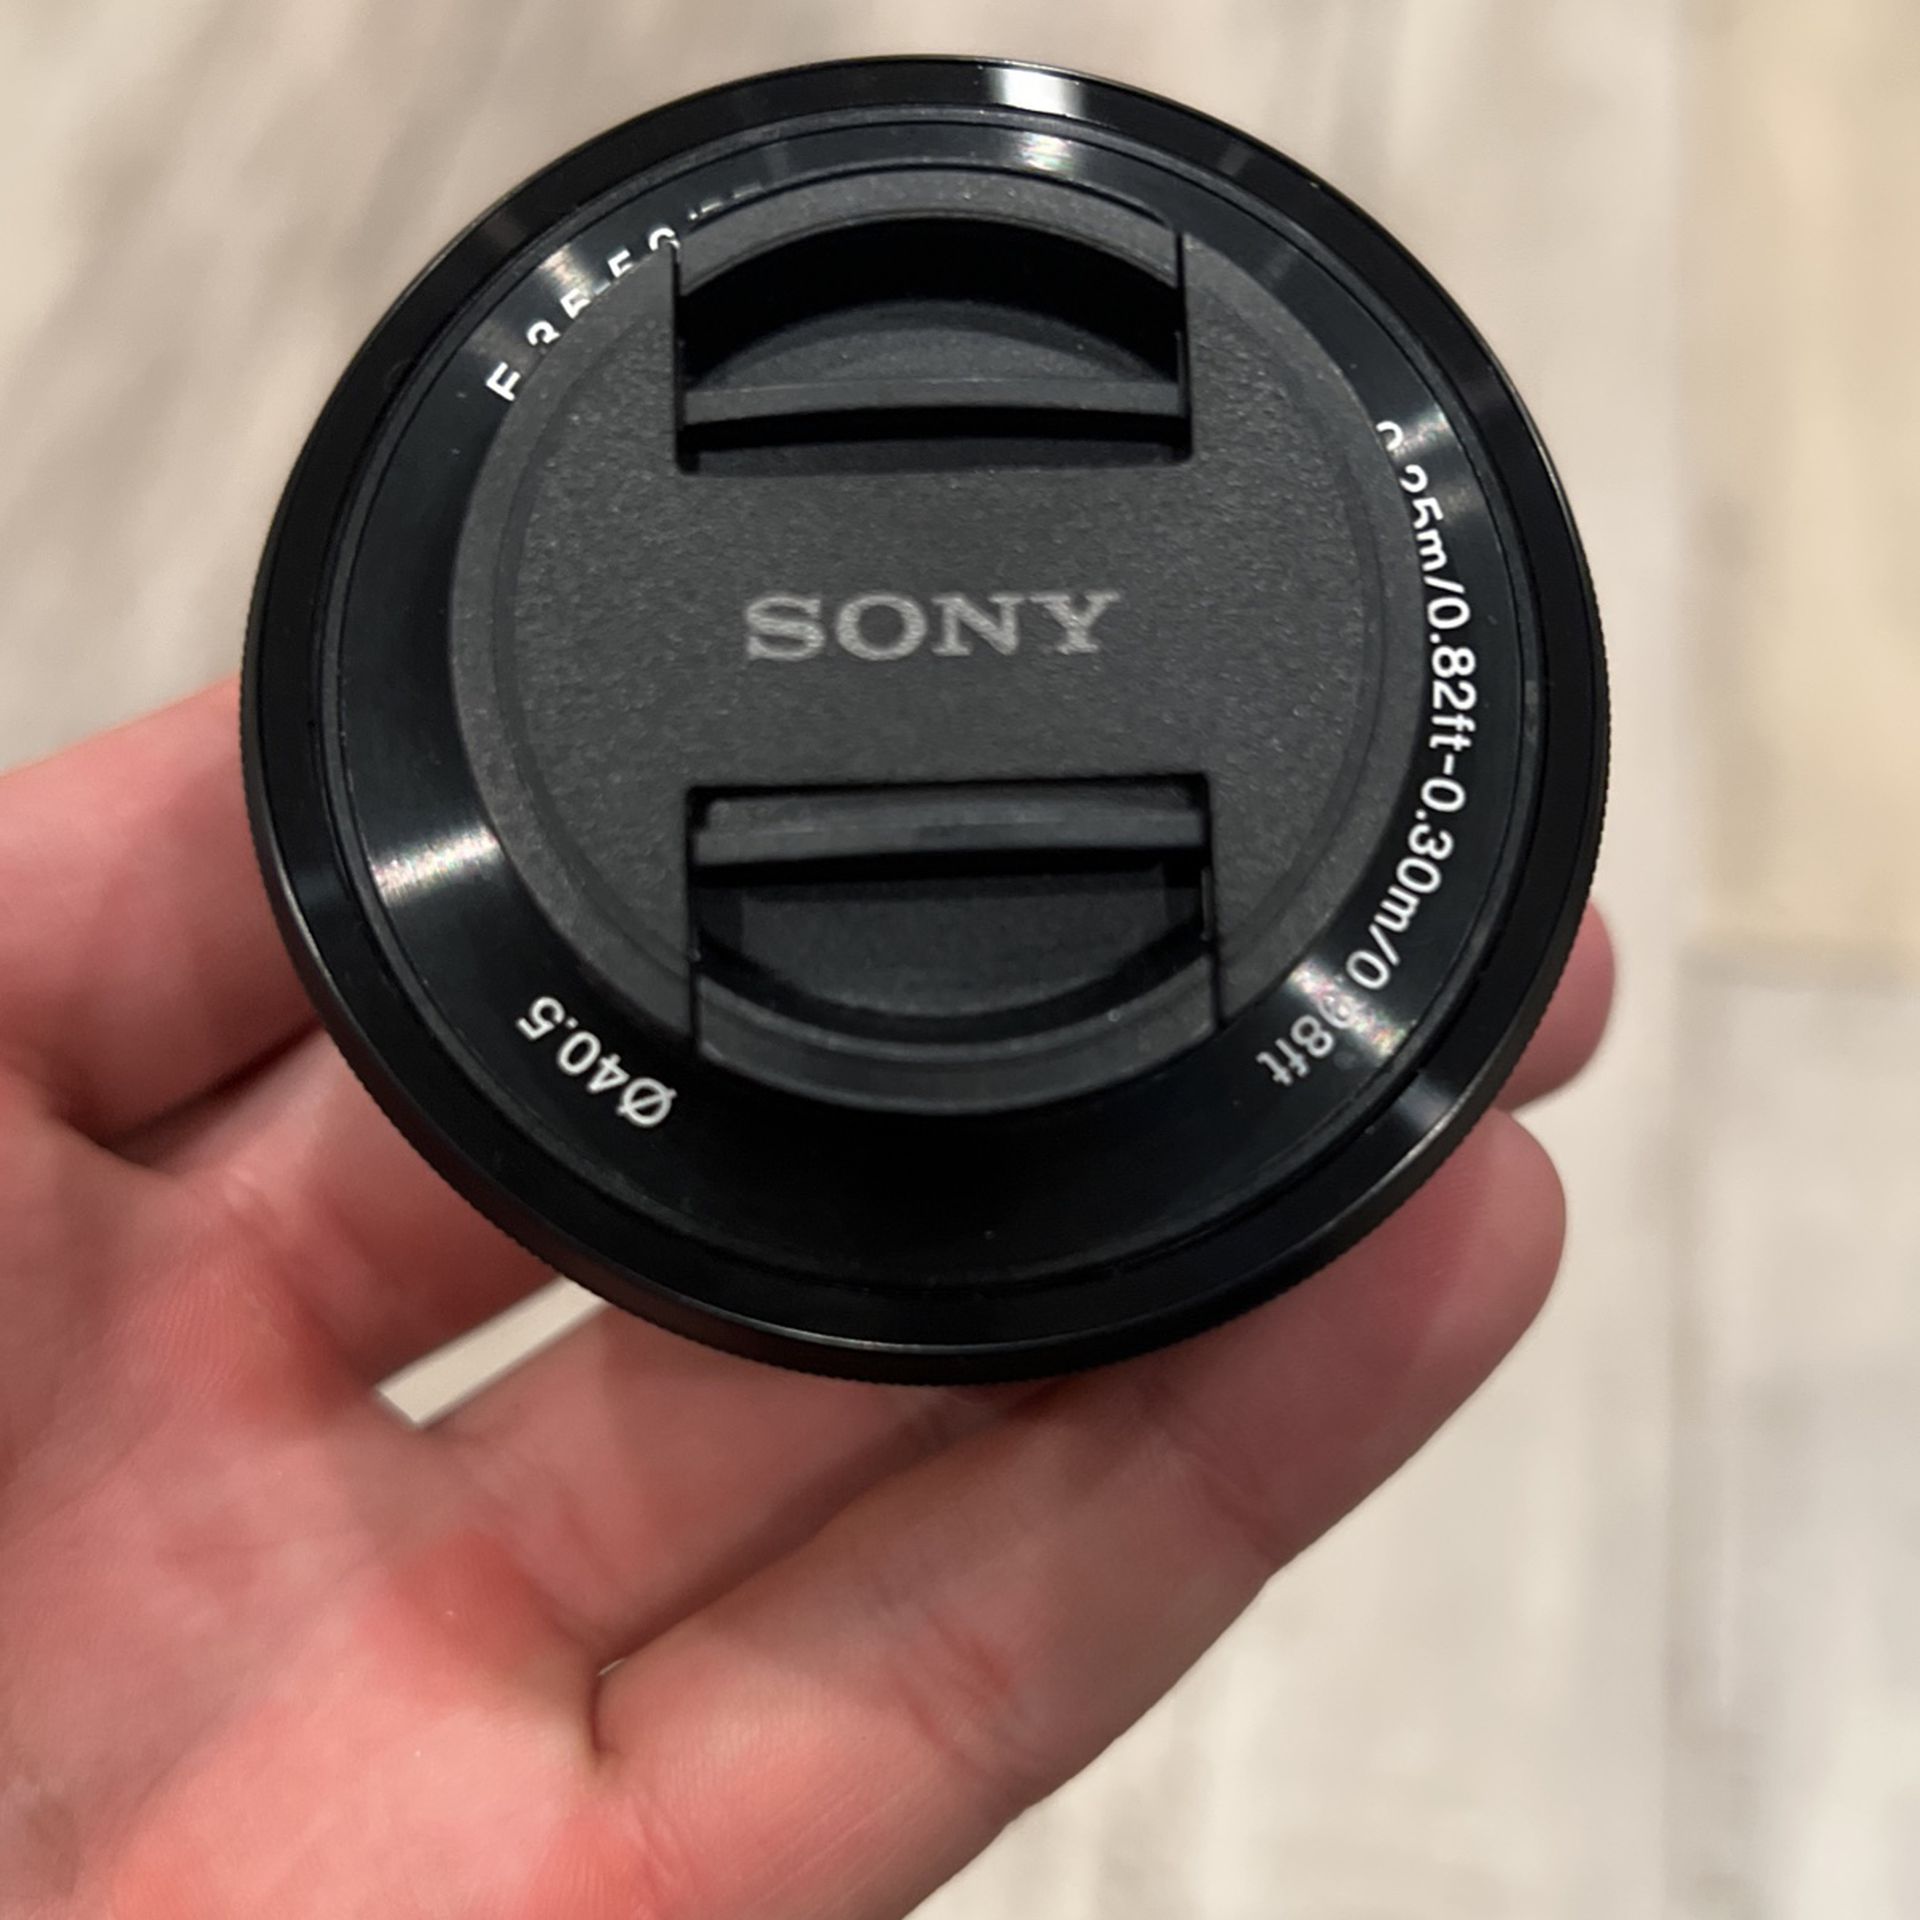 Sony - 16-50mm f/3.5-5.6 Retractable Zoom Lens for Most NEX E-Mount Cameras - Black